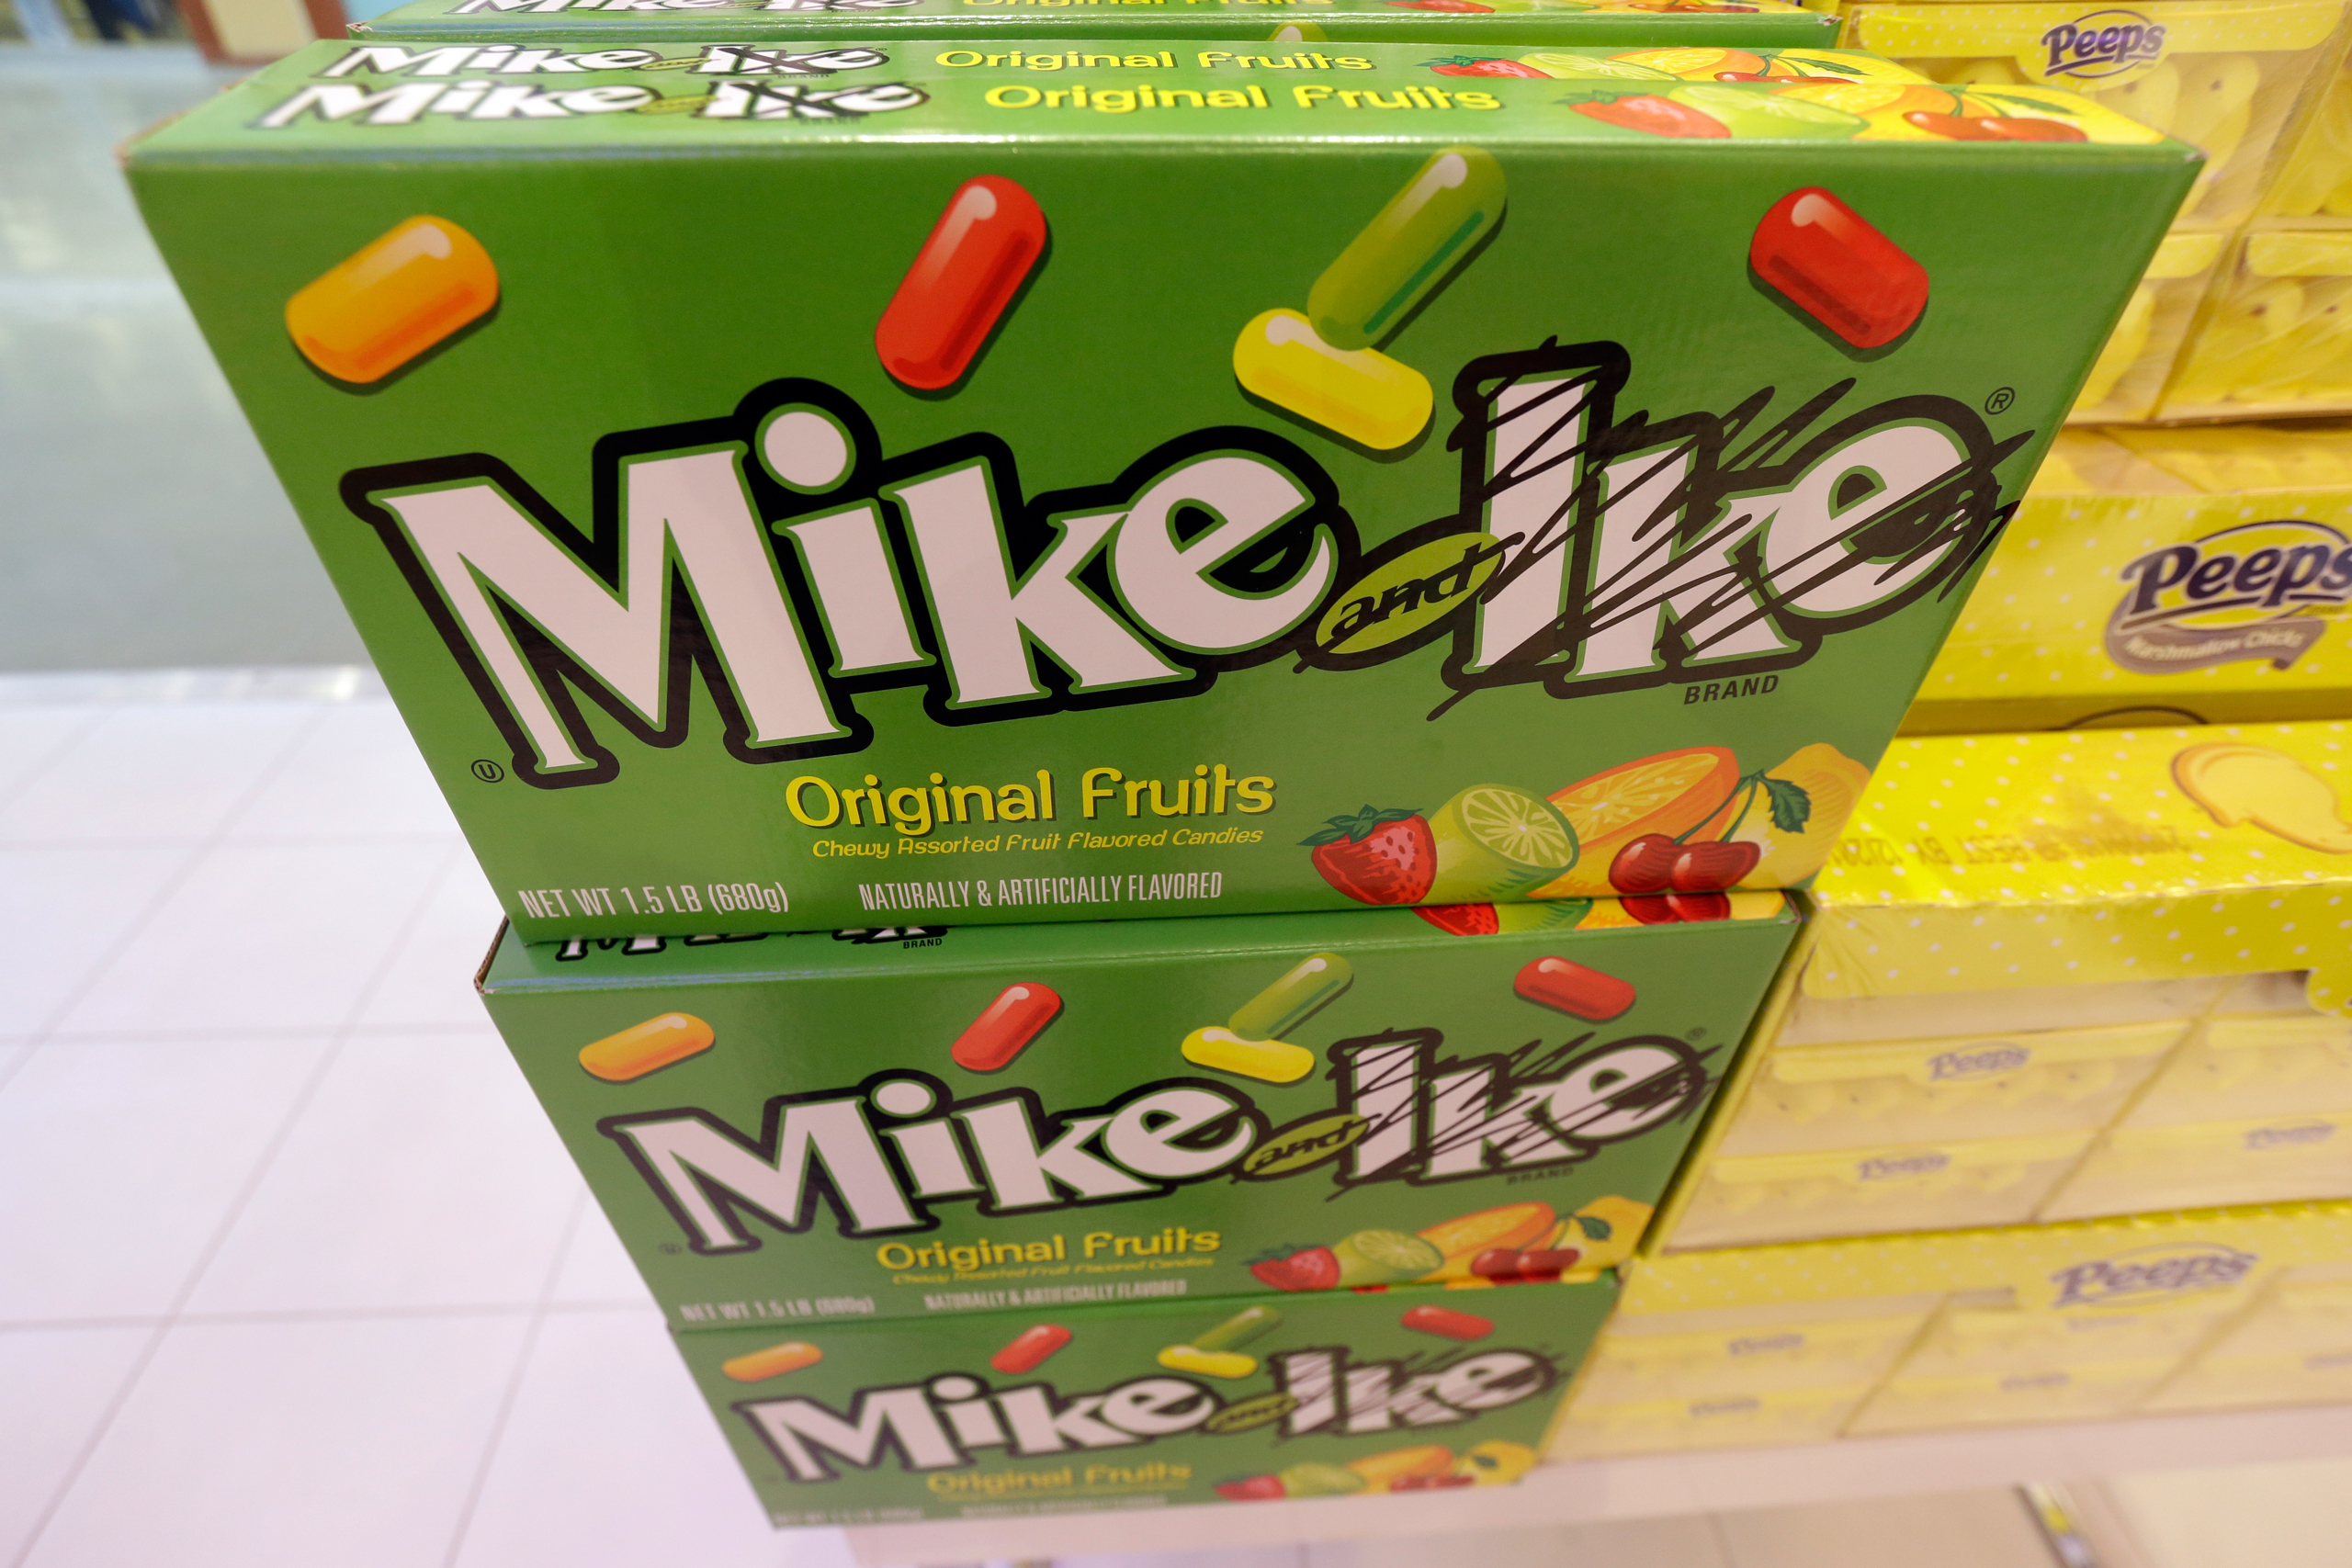 California Woman Sues Mike and Ike Company, Claiming Boxes Are Only Half-Full of Candy